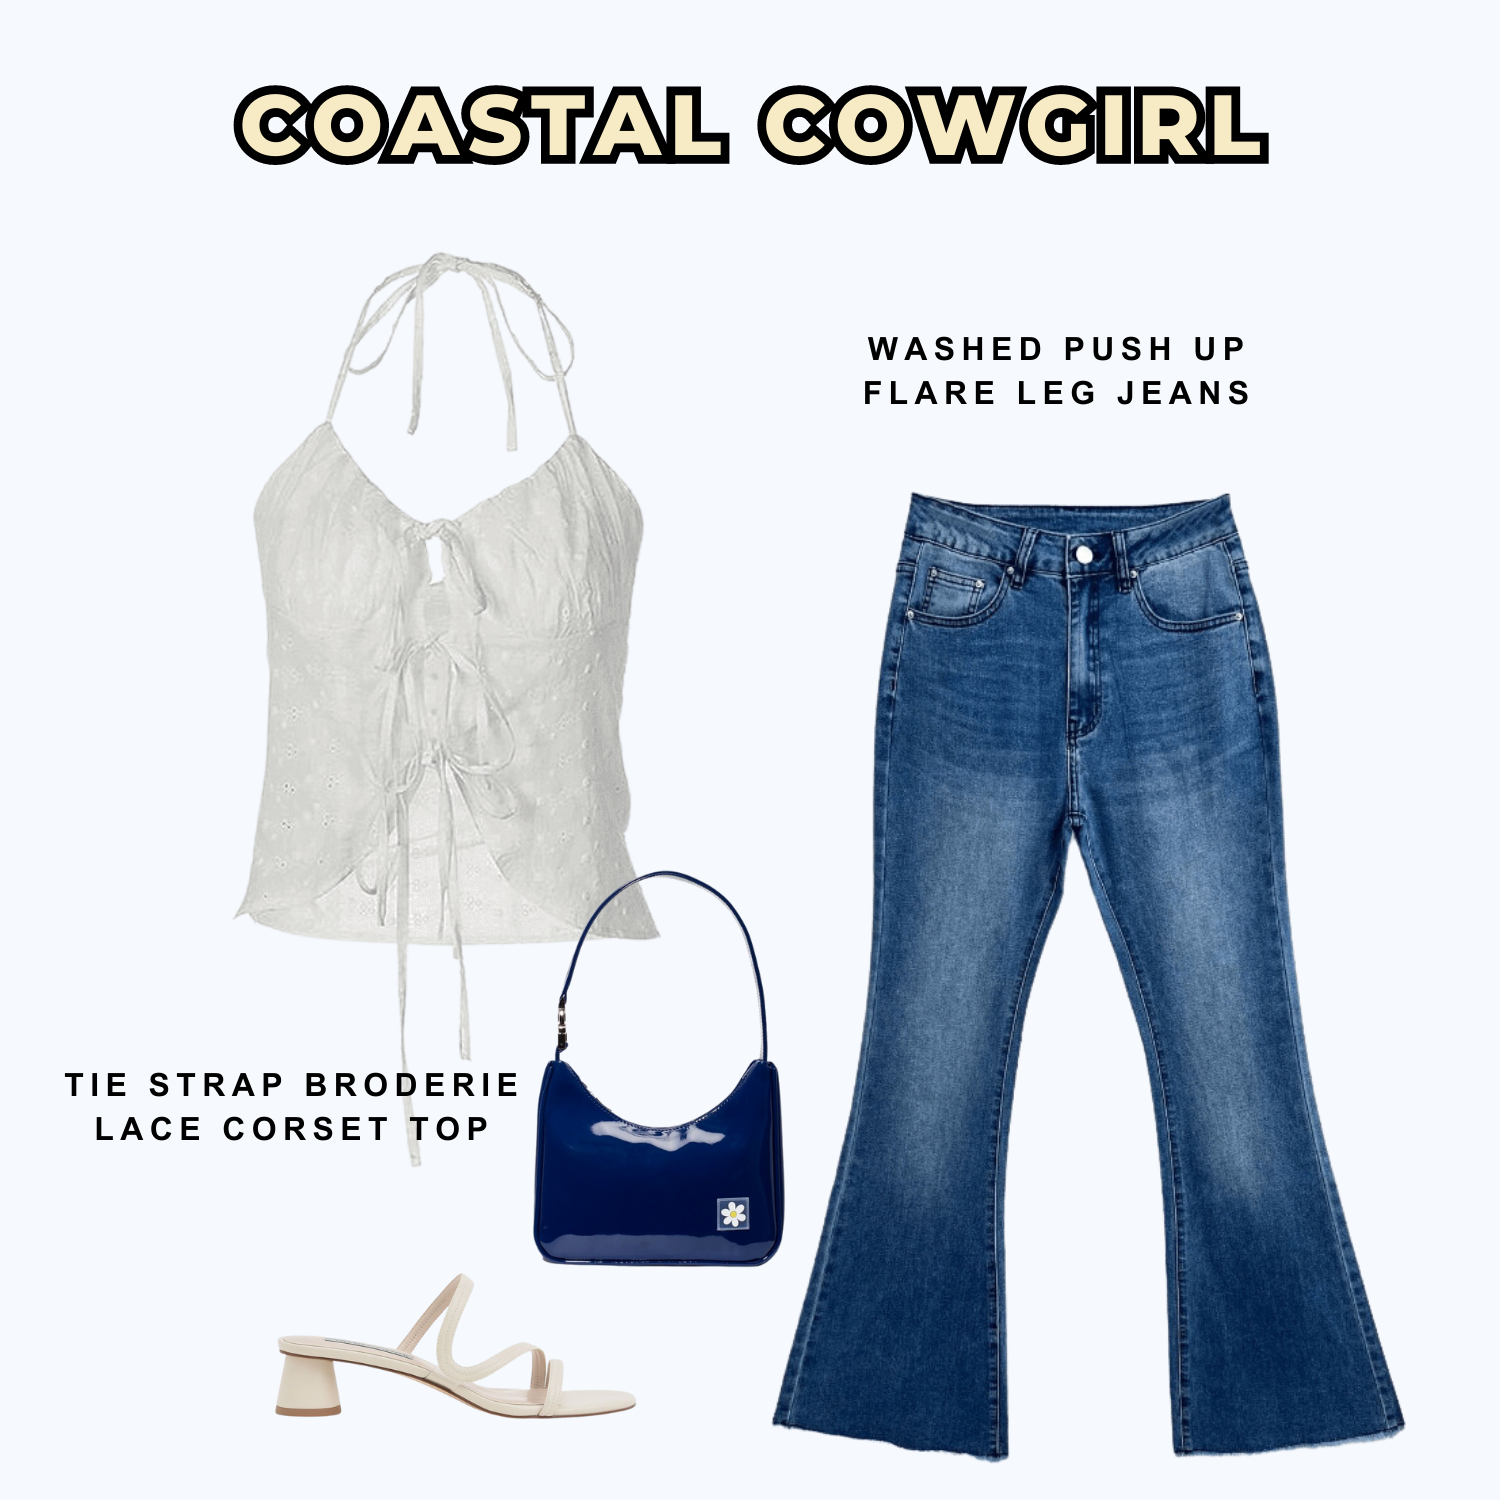 Coastal Cowgirl look 2 - AnotherChill